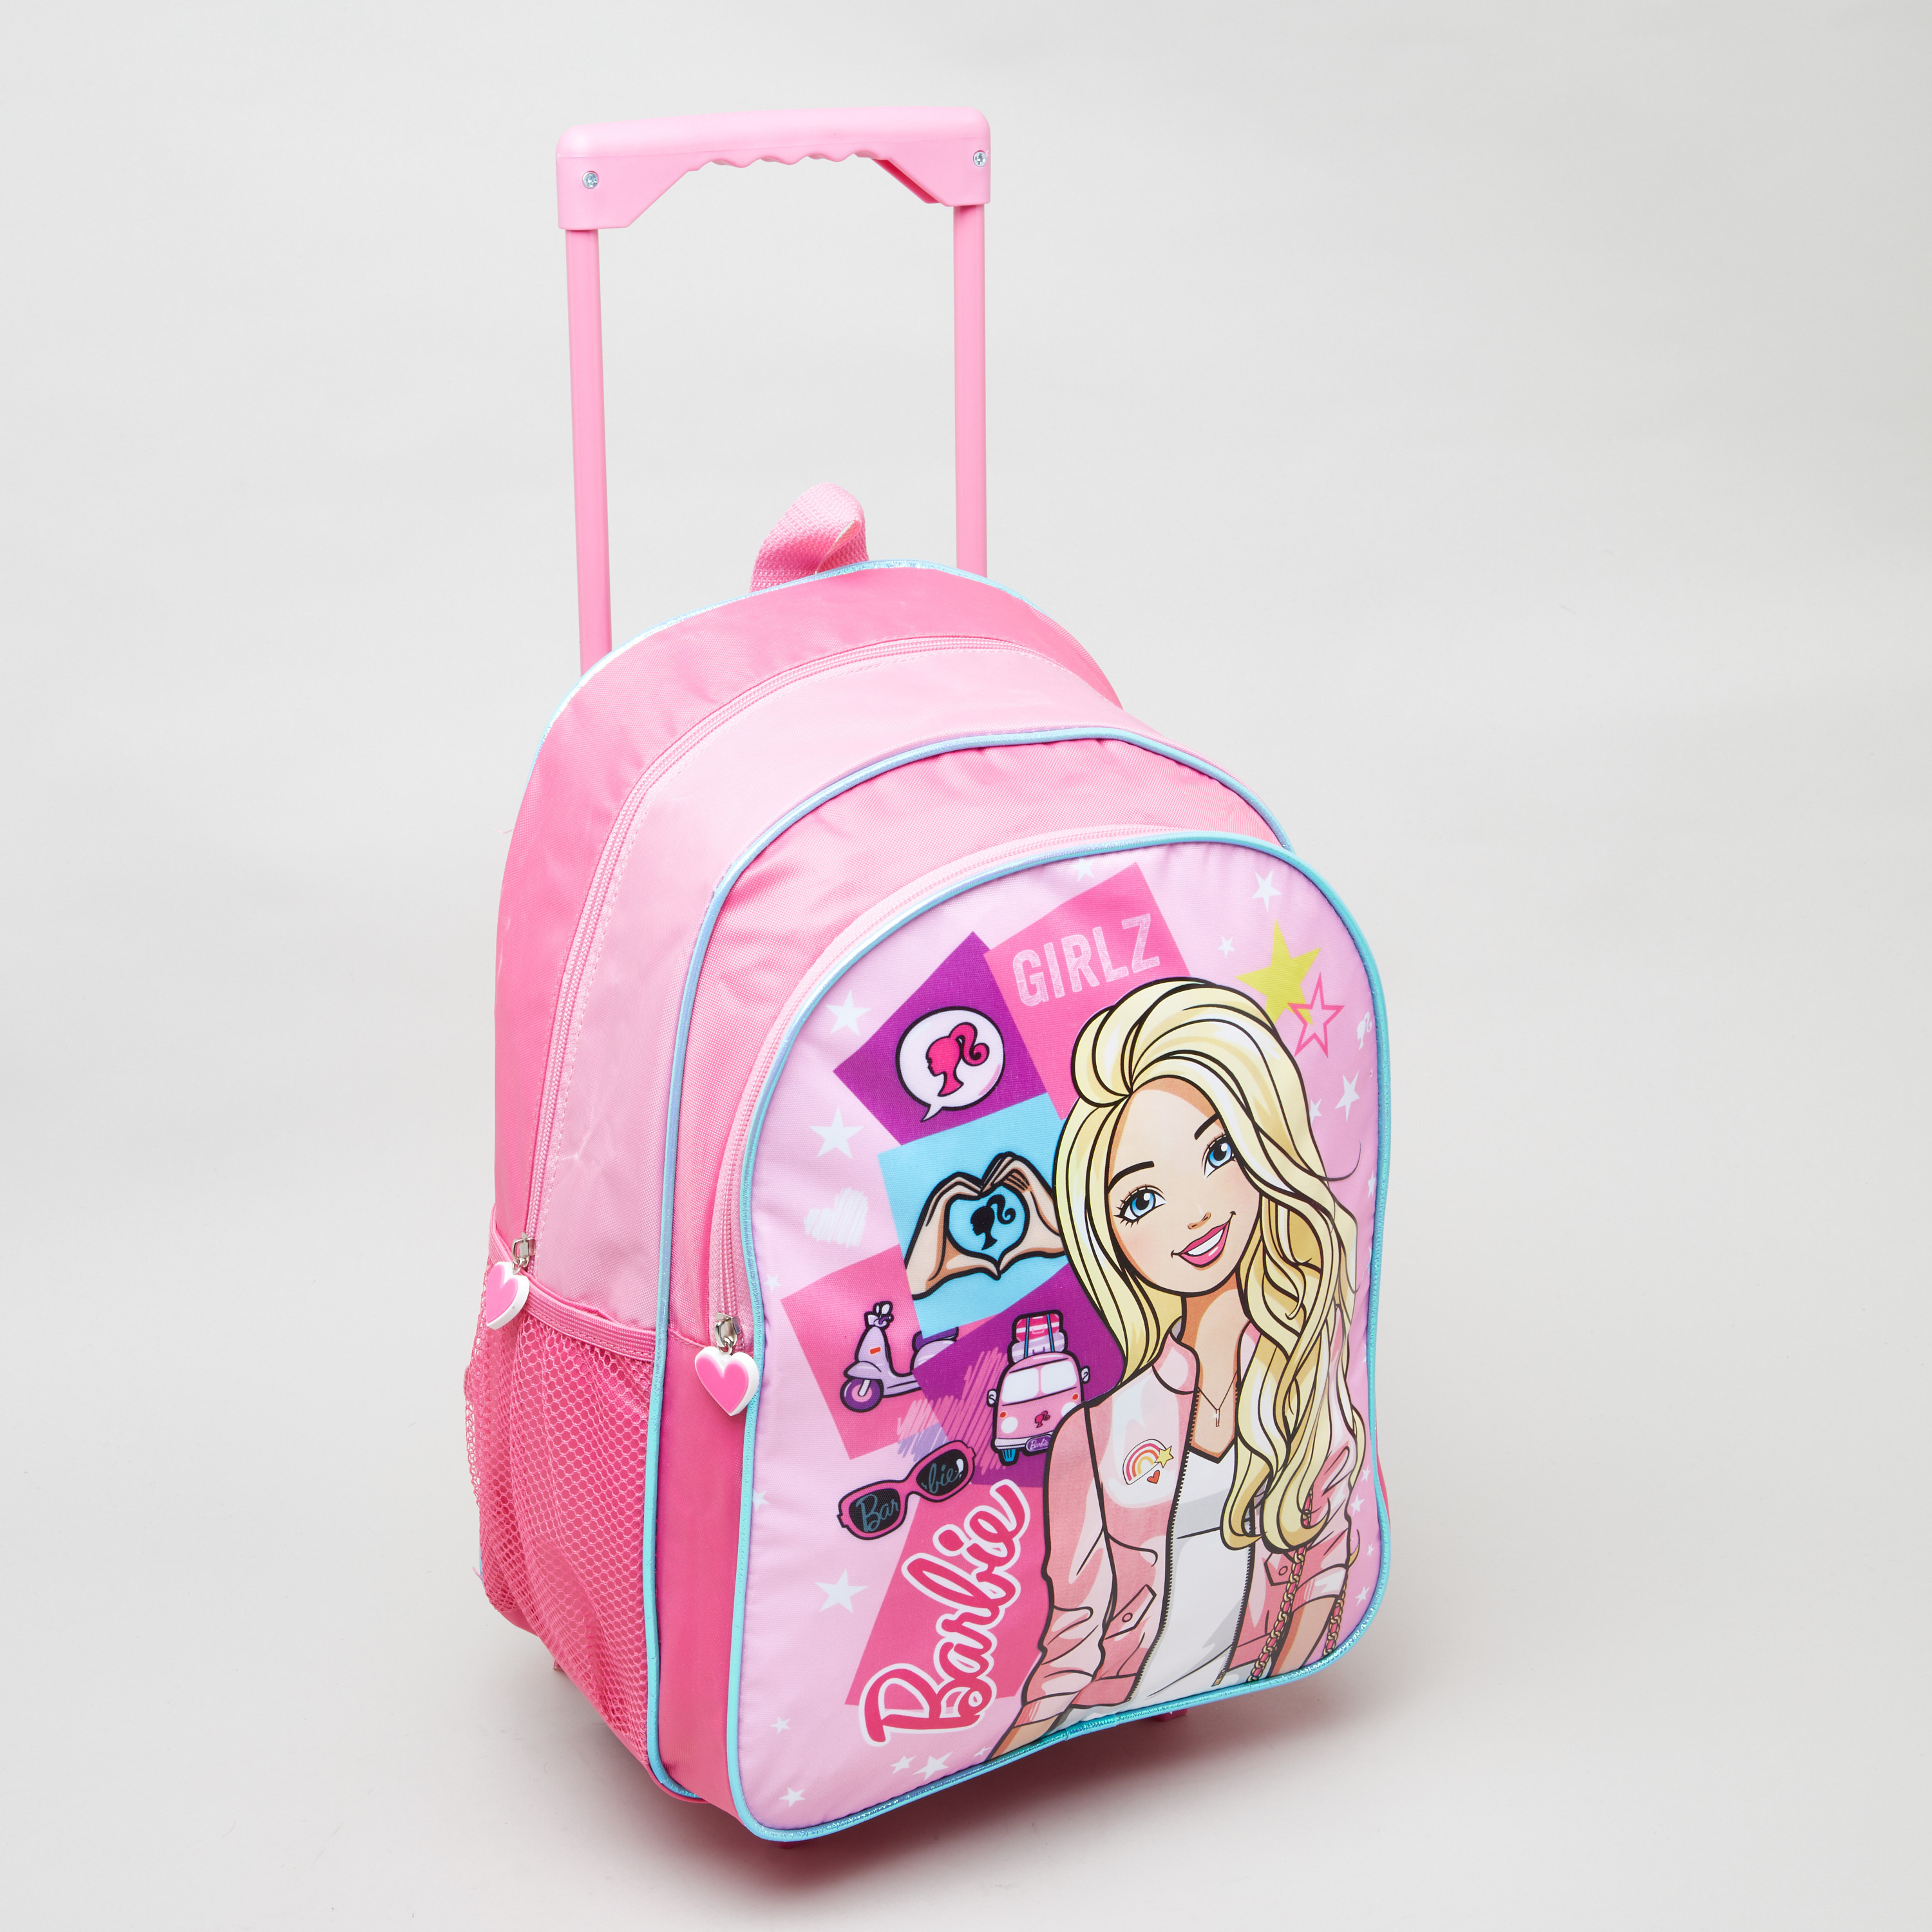 ADSON Kid's Trolley 360 Rotating Luggage Wheels Non-Breakable Barbie 20  Inch Kids Suitcase with 4 Wheel Travel Trolley Bag (Pink) : Amazon.in:  Fashion